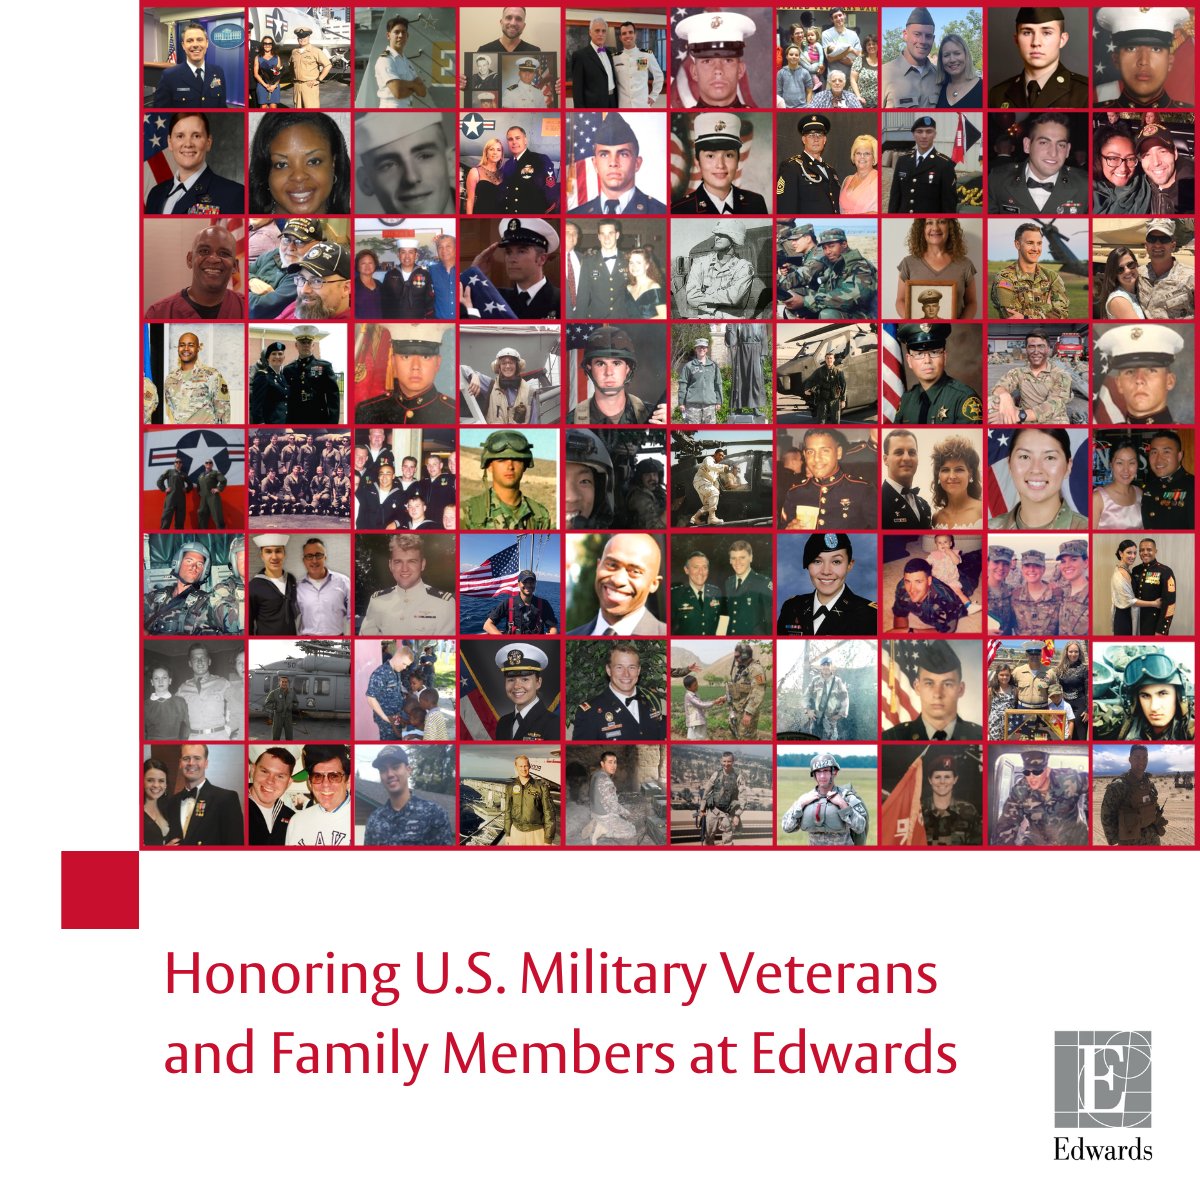 On #VeteransDay, we salute Edwards employees and their family members who served our country. We’re grateful for your service, sacrifice and dedication. 🇺🇸